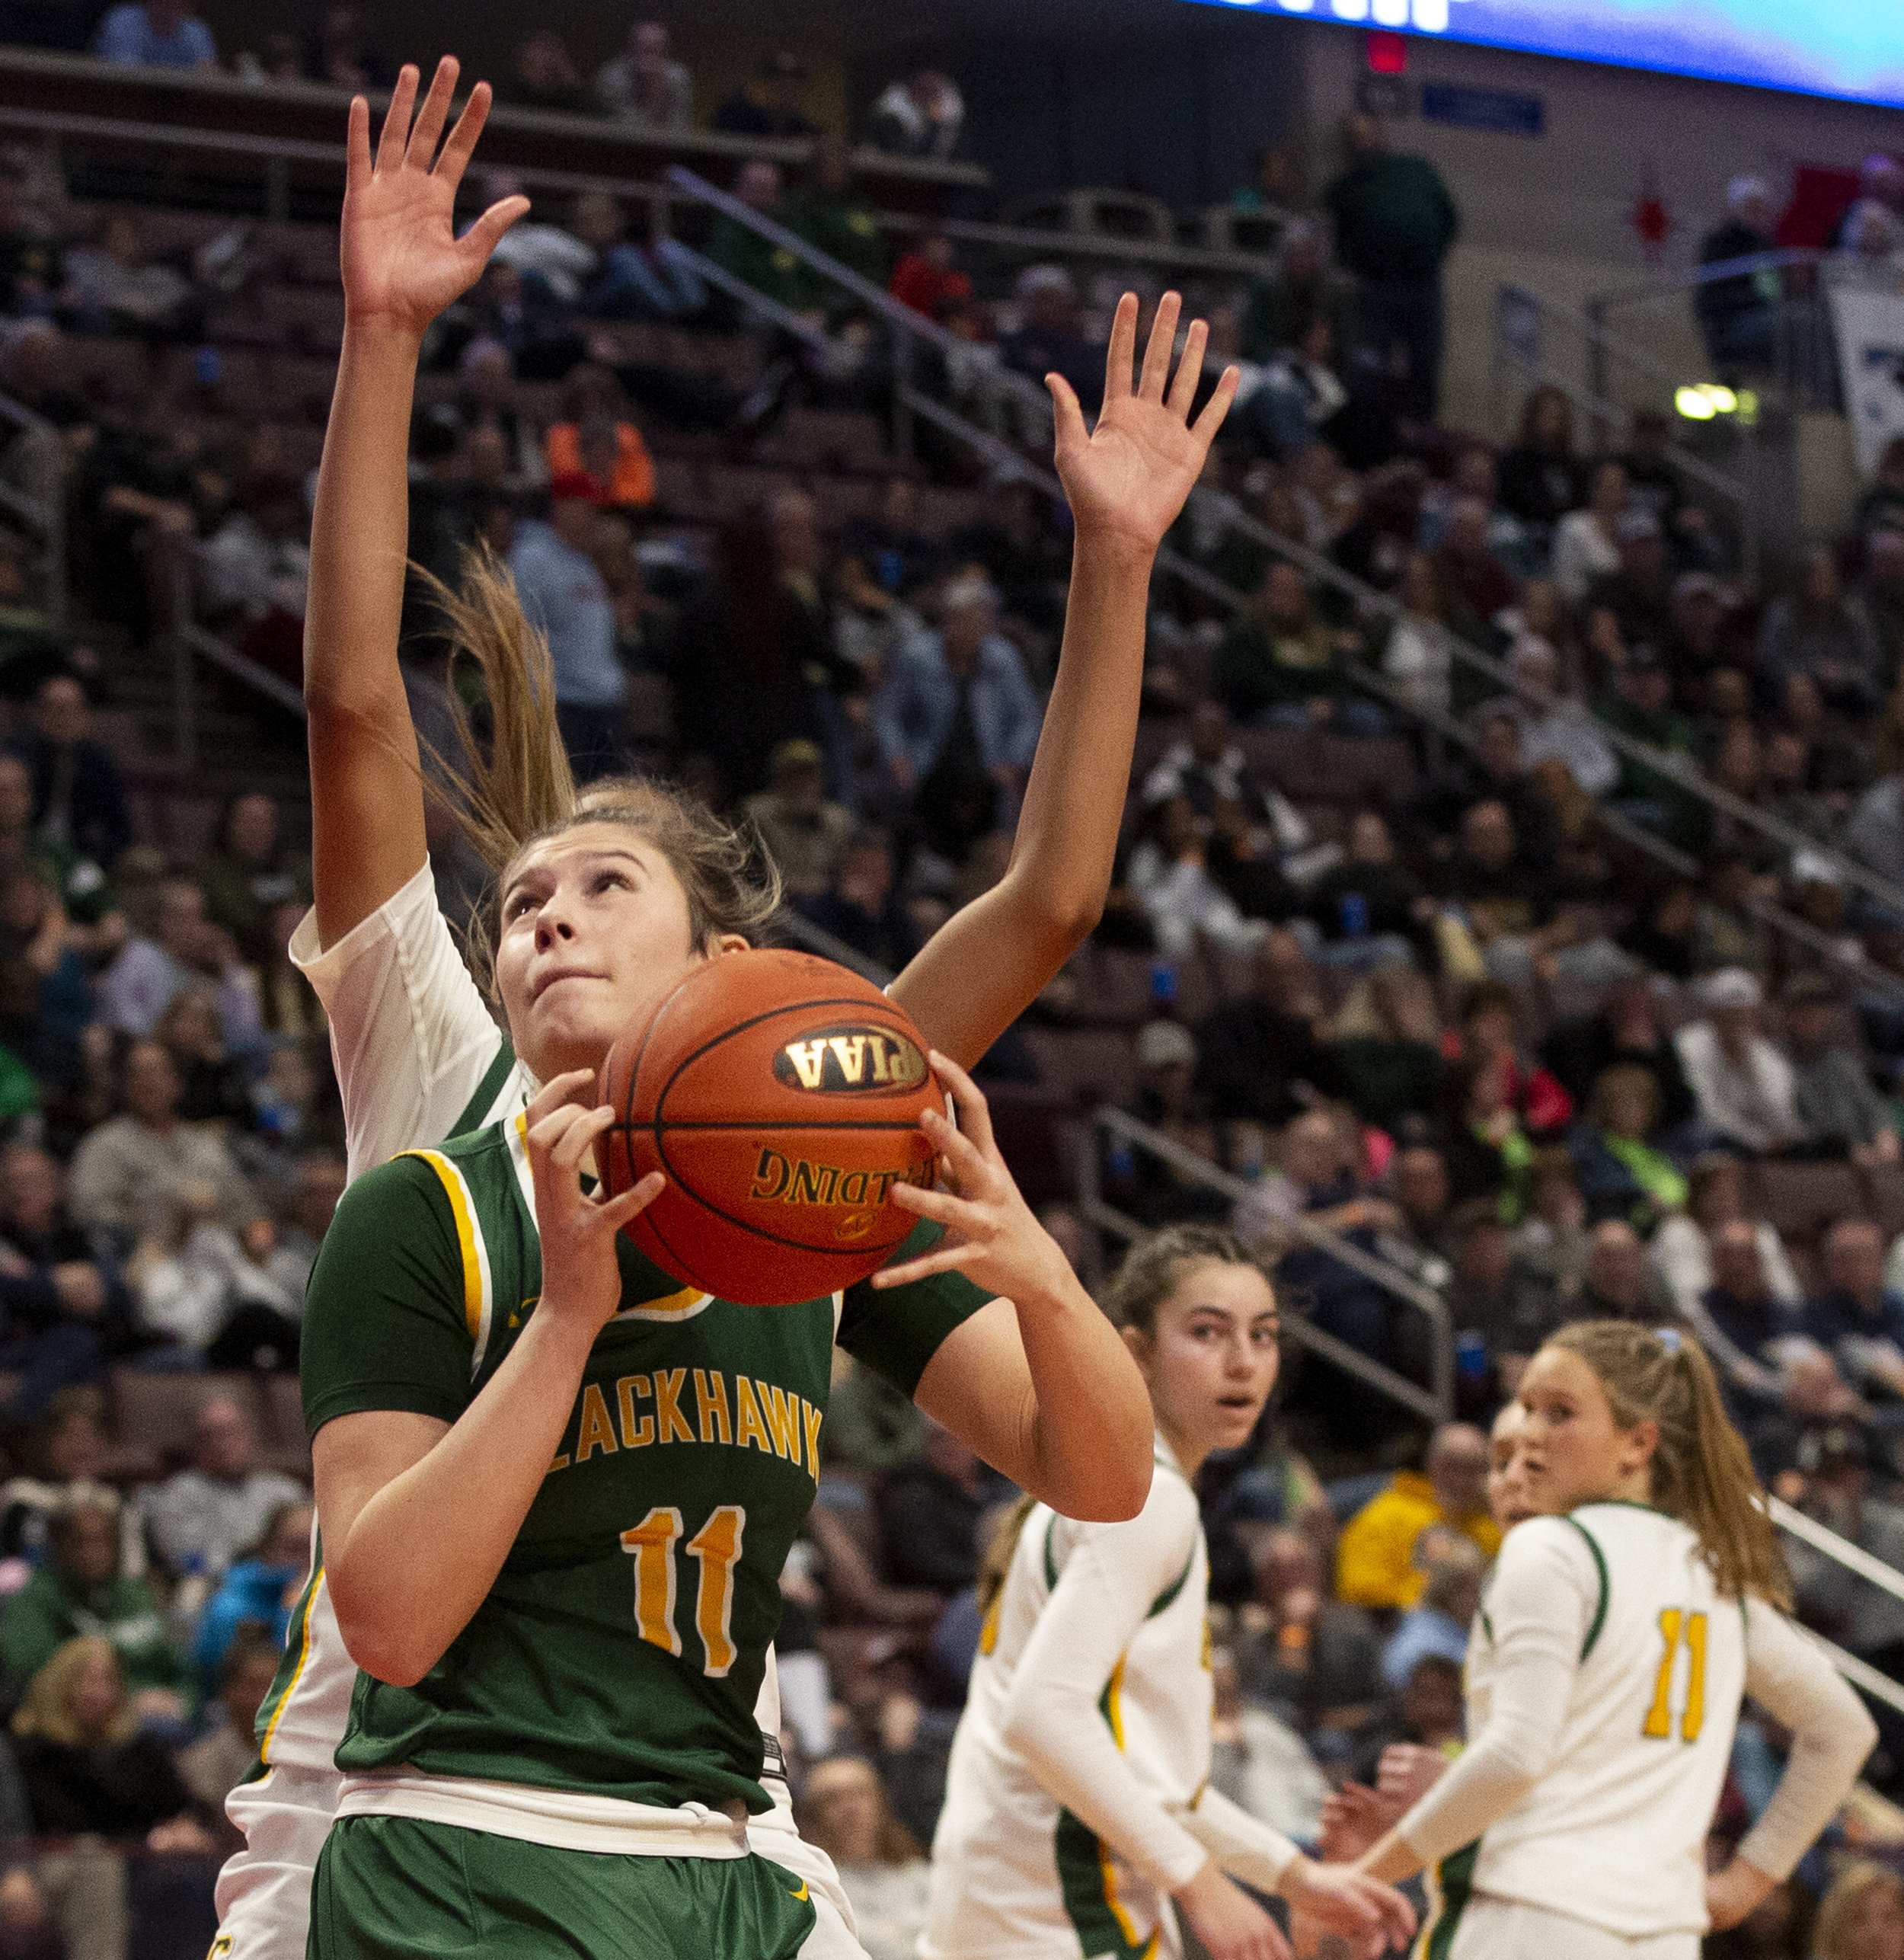  Blackhawk's Alena Fusetti looks to make a basket against Lansdale Catholic in the PIAA 4A championship on Saturday, March 25, 2023, at Giant Center in Hershey, Pa. Blackhawk lost 53-45. (Emily Matthews/Pittsburgh Union Progress) 